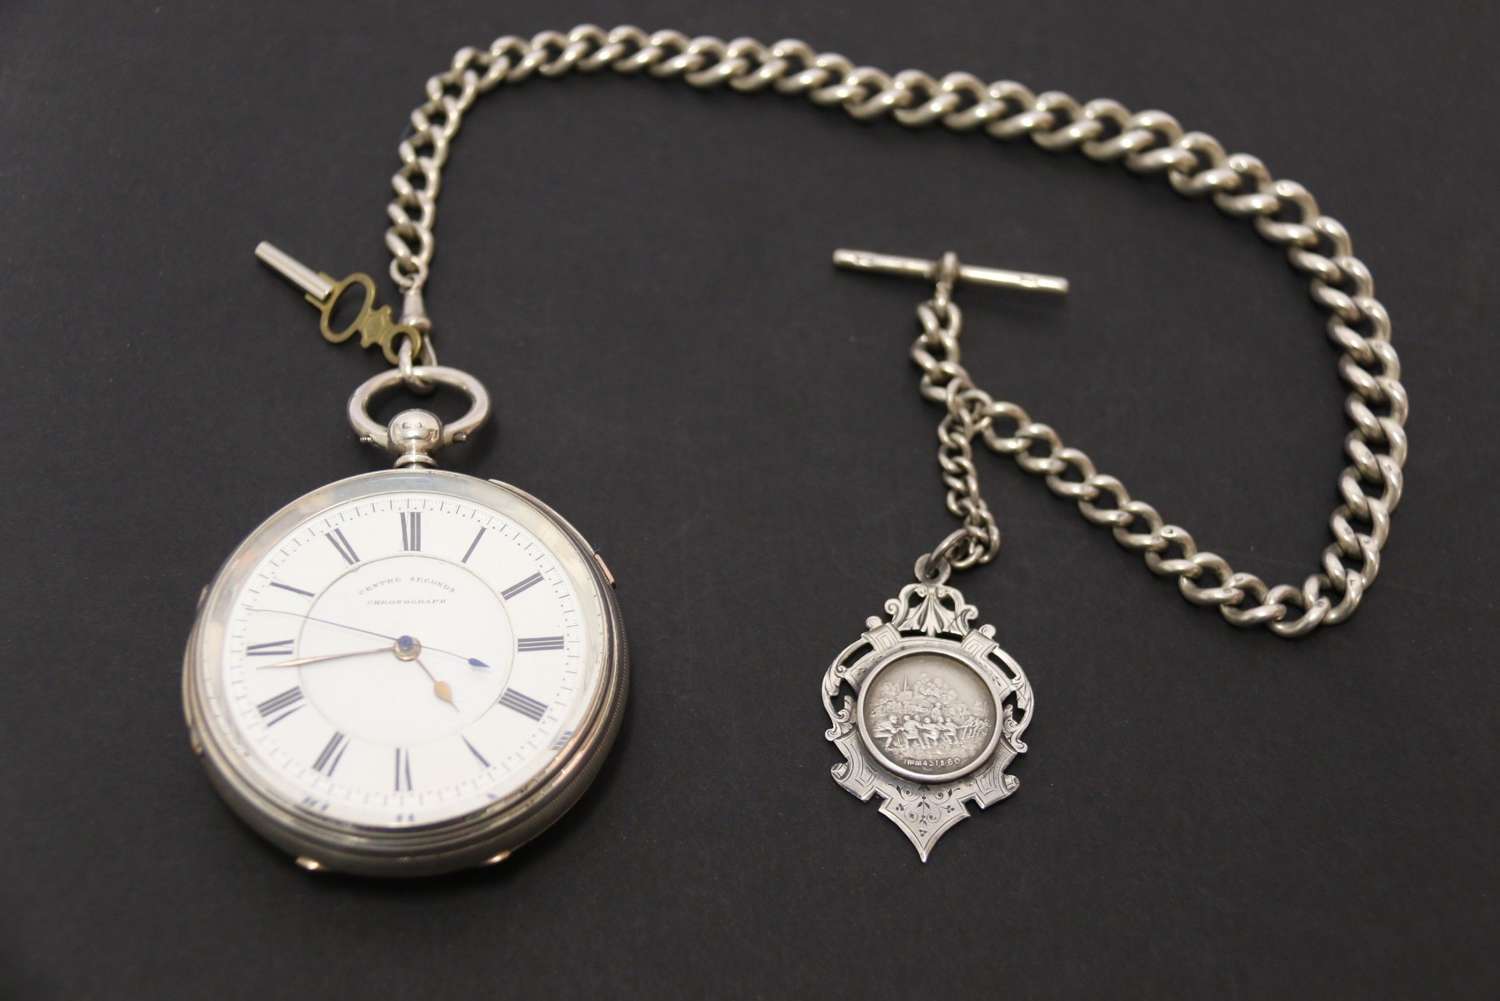 An Over Sized Silver Chronograph Pocket Watch And Chain With Mining Tug Of War Fob.